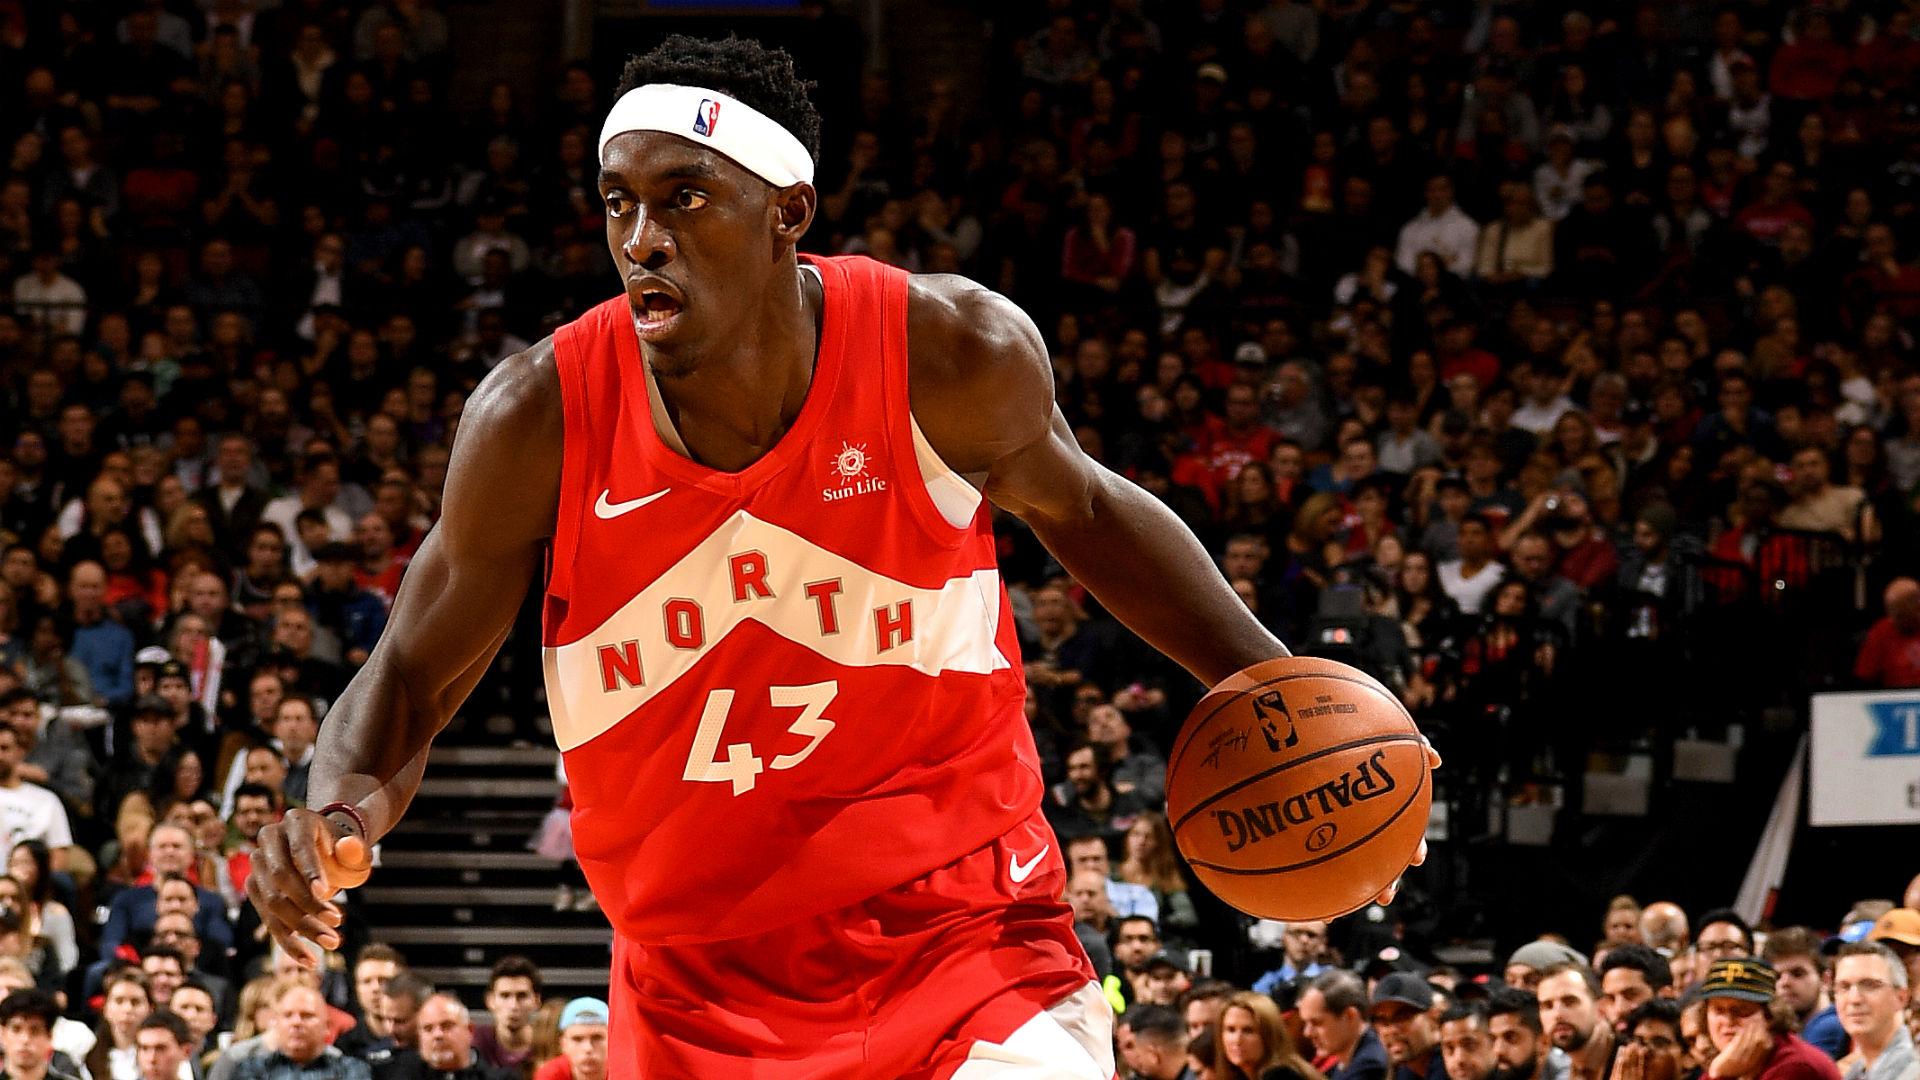 NBA All Star Game: Should Pascal Siakam Be An All Star?